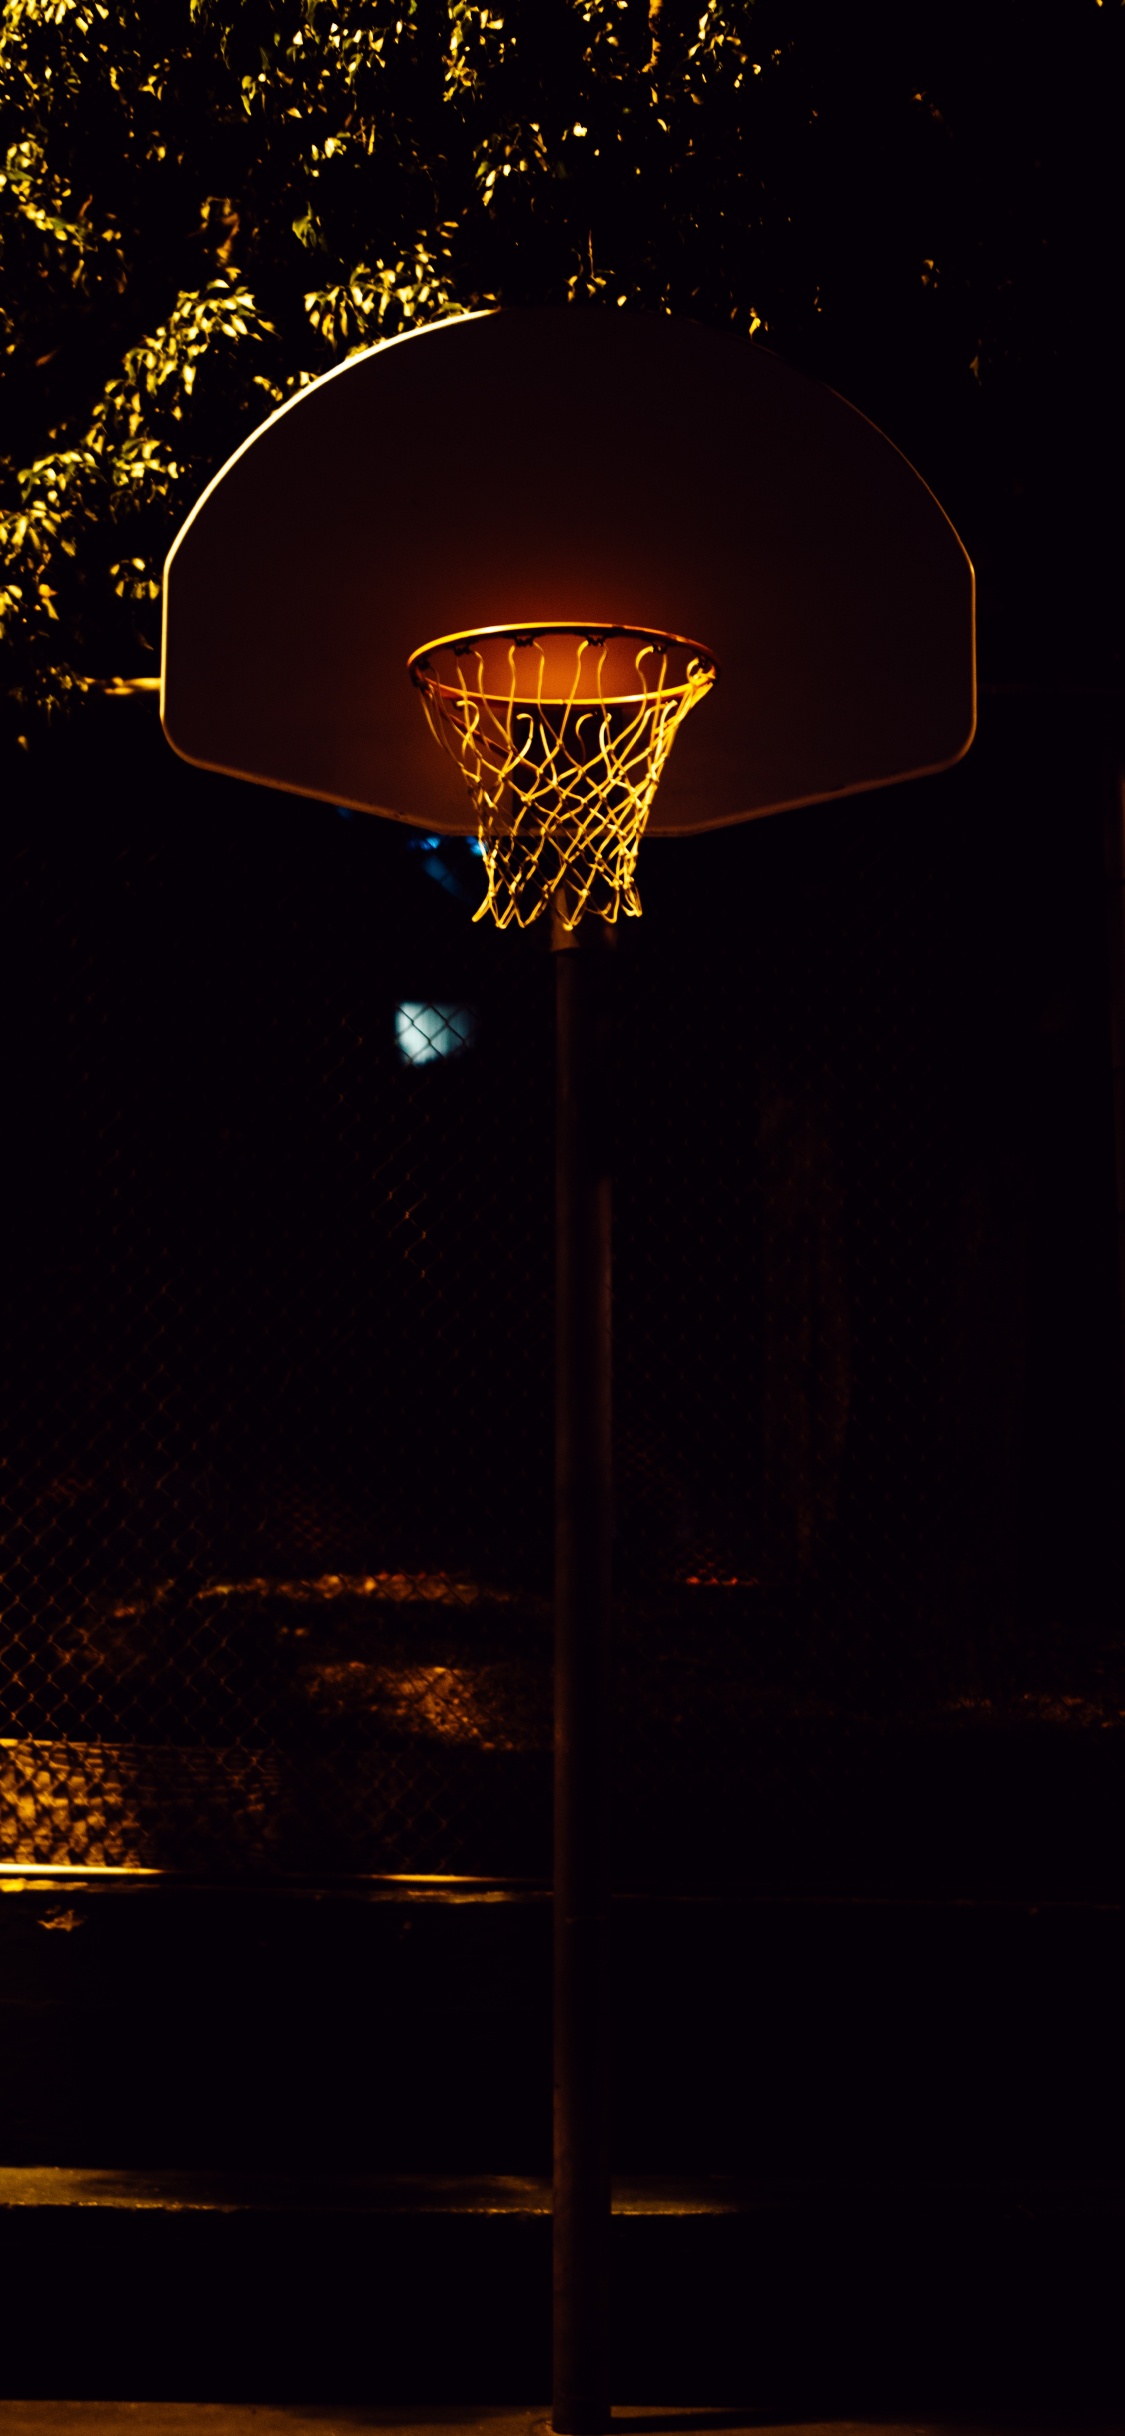 Basketball Hoop With Light Turned on During Night Time. Wallpaper in 1125x2436 Resolution